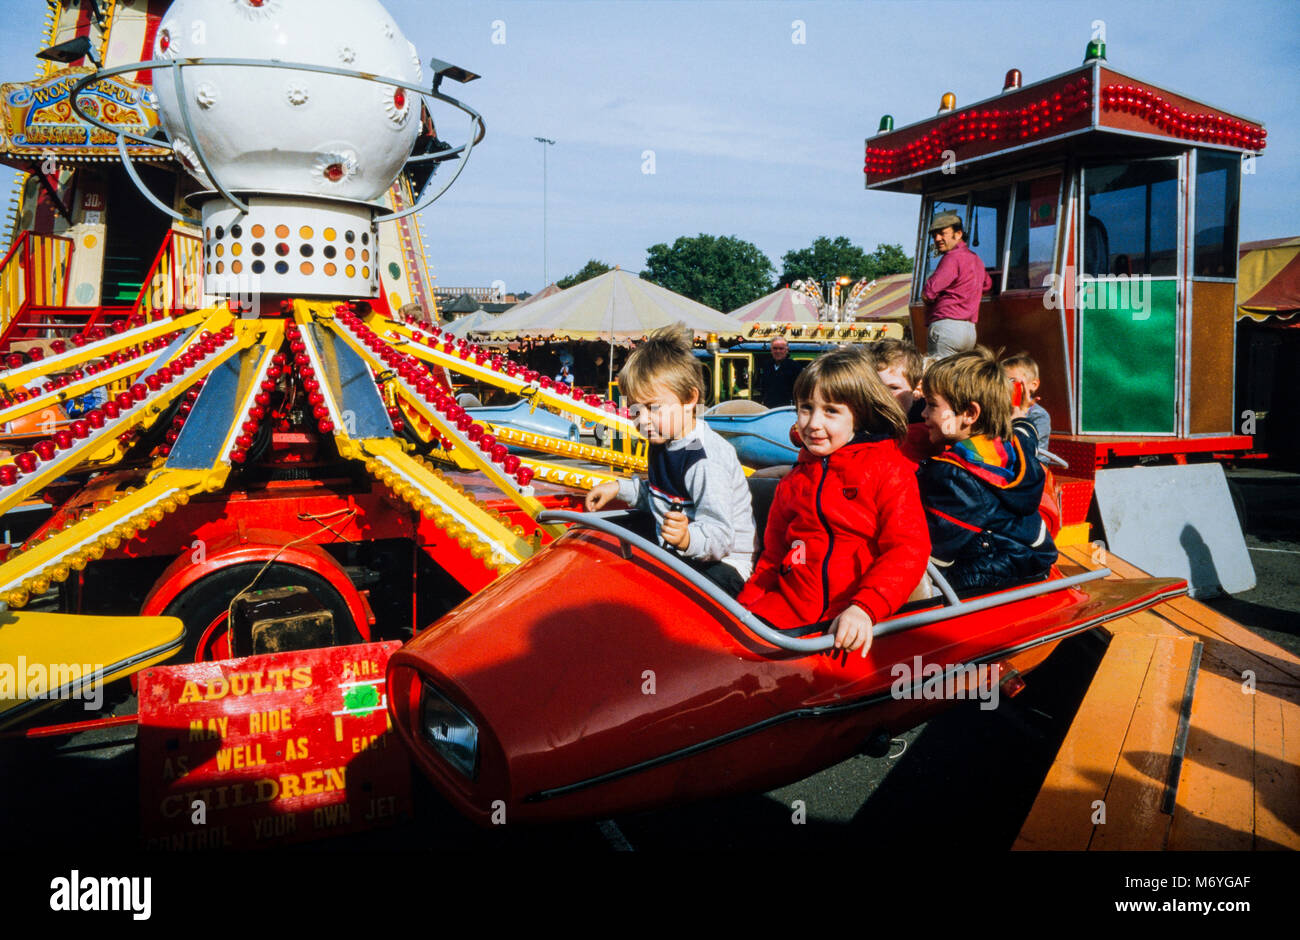 Young children on a kiddies ride at Nottingham Goose Fair, an annual travelling funfair held at the Forest Recreation Ground in Nottingham, England, during the first week of October. Archival photograph made in October 1987, England Stock Photo